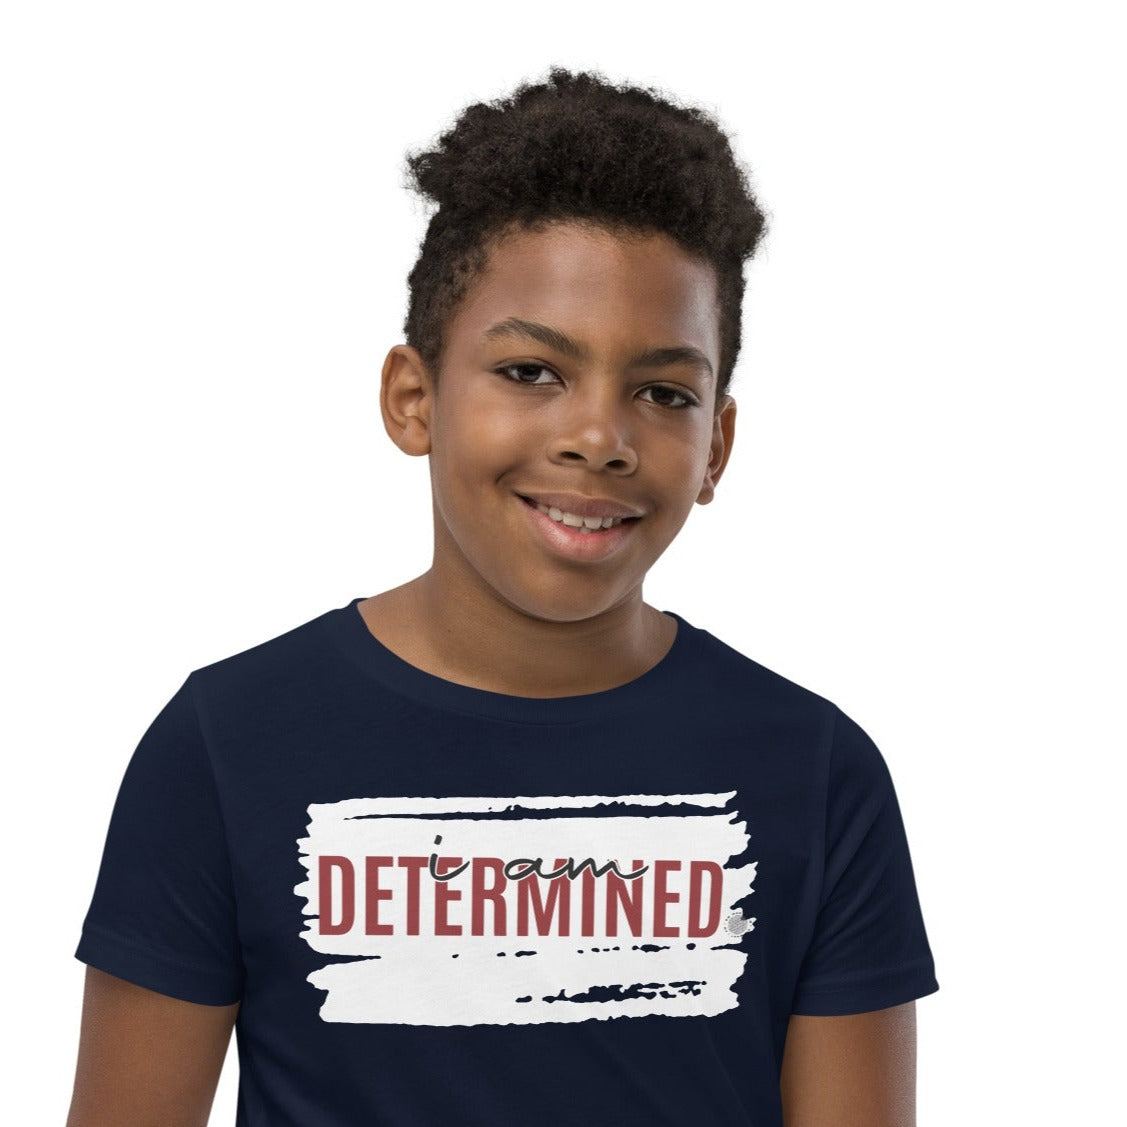 Our ‘I Am Determined’ affirmation youth t-shirt describes your son or daughter who is set on creating the best erupting volcano science project ever. Your child has no limits. Positive thinking can build their confidence.